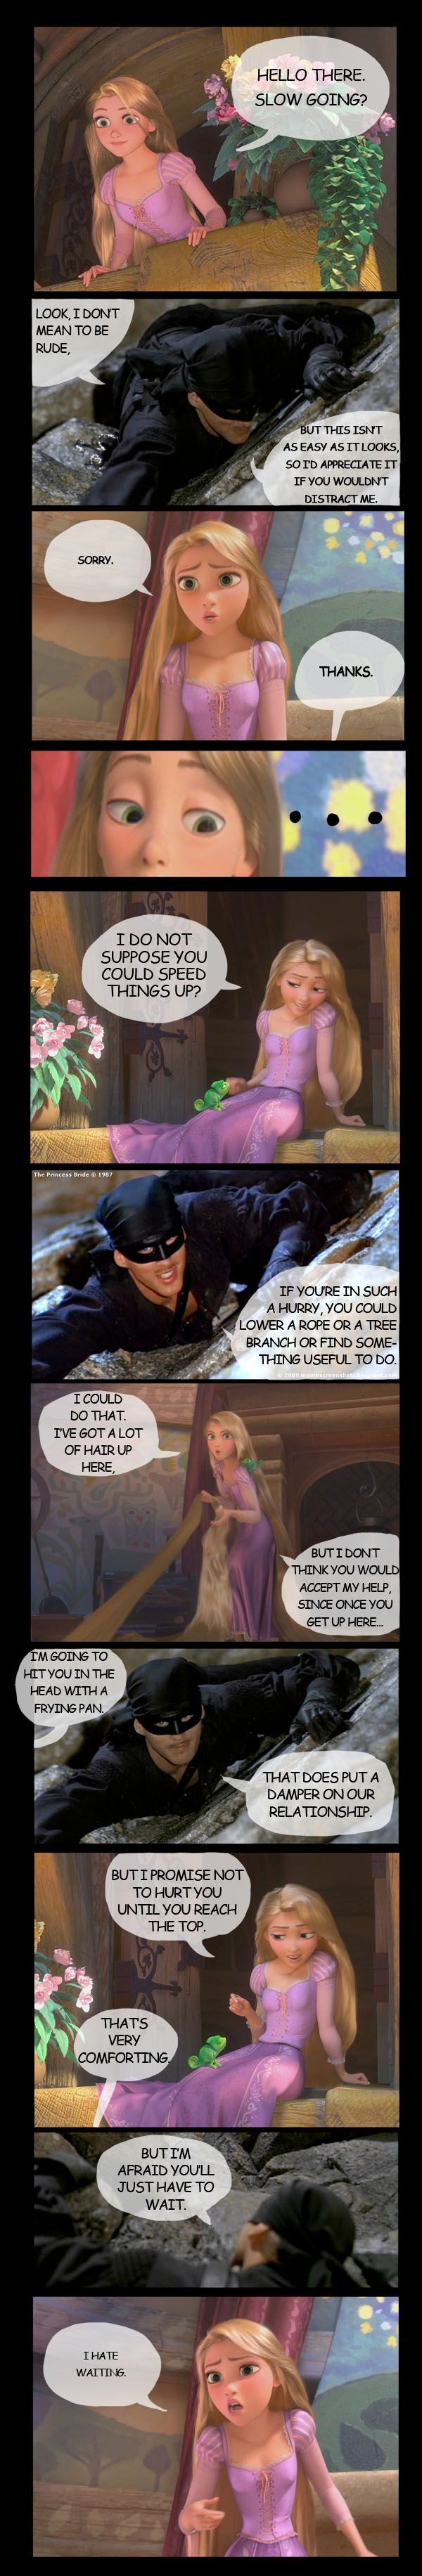 Princess Bride and Tangled, two of my favourite movies combined into one!